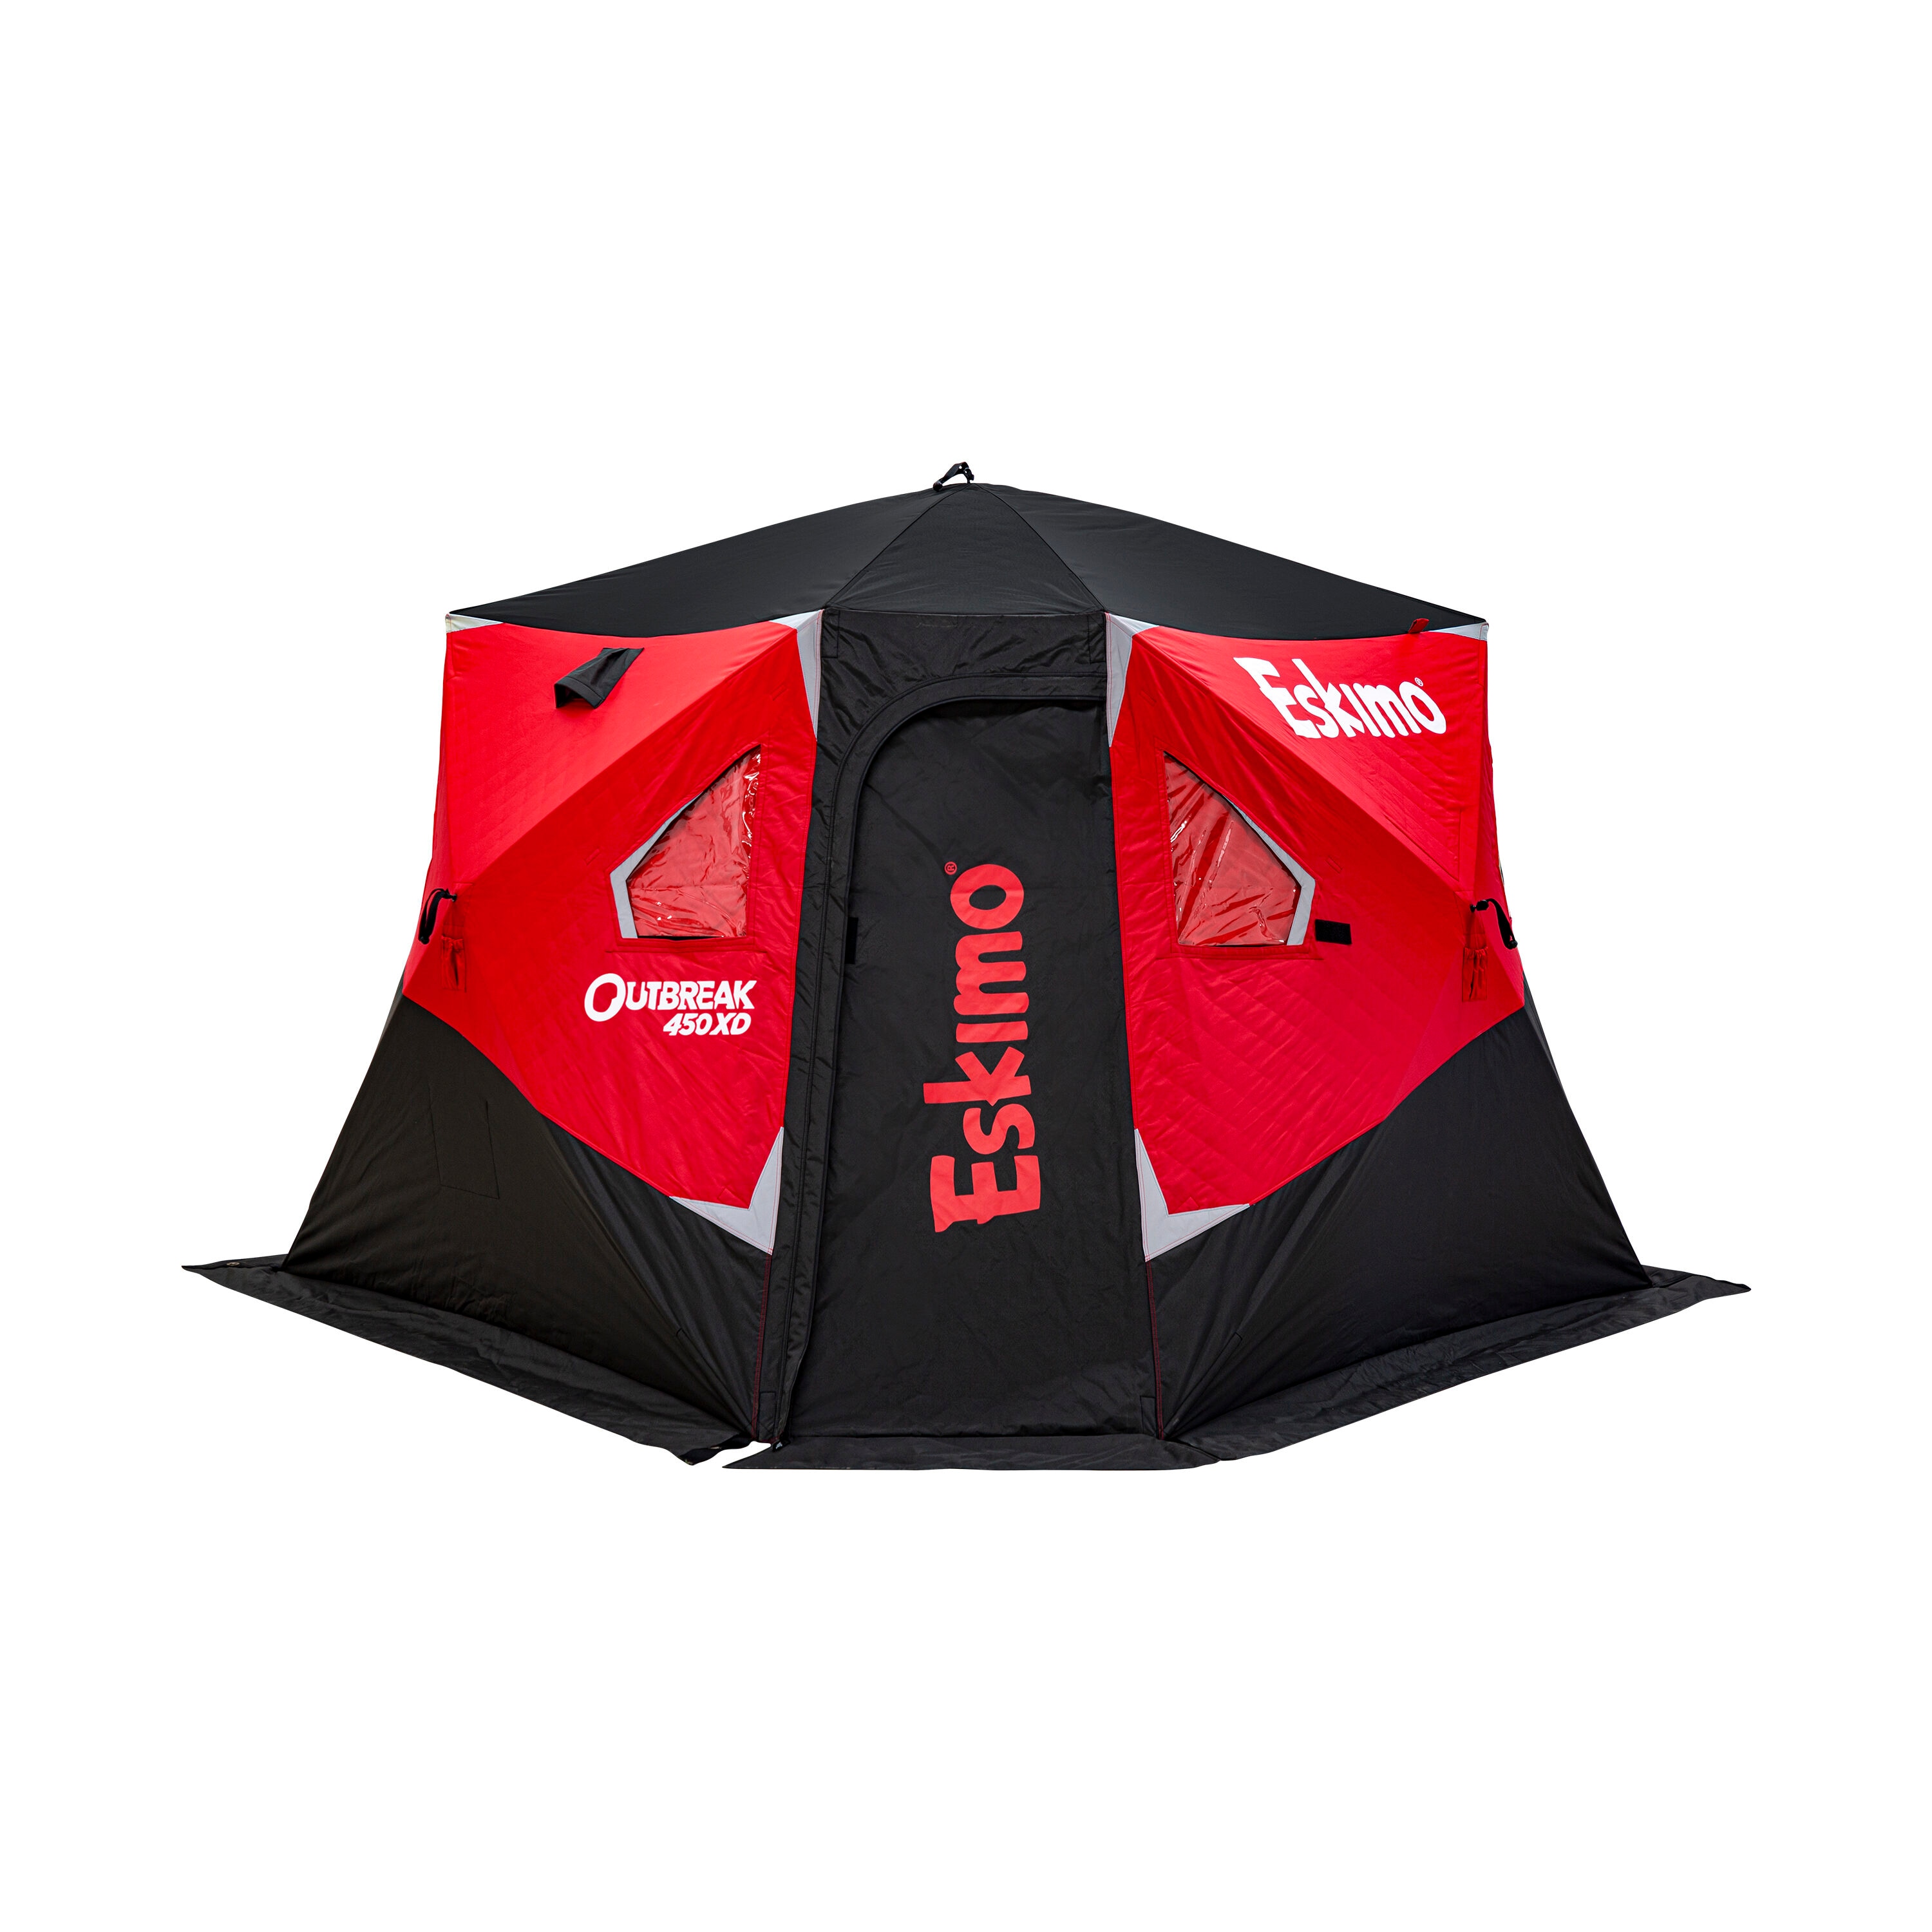 Eskimo Outbreak 450XD Portable Ice Shelter Fishing Storage Cabinet in the  Fishing Equipment department at